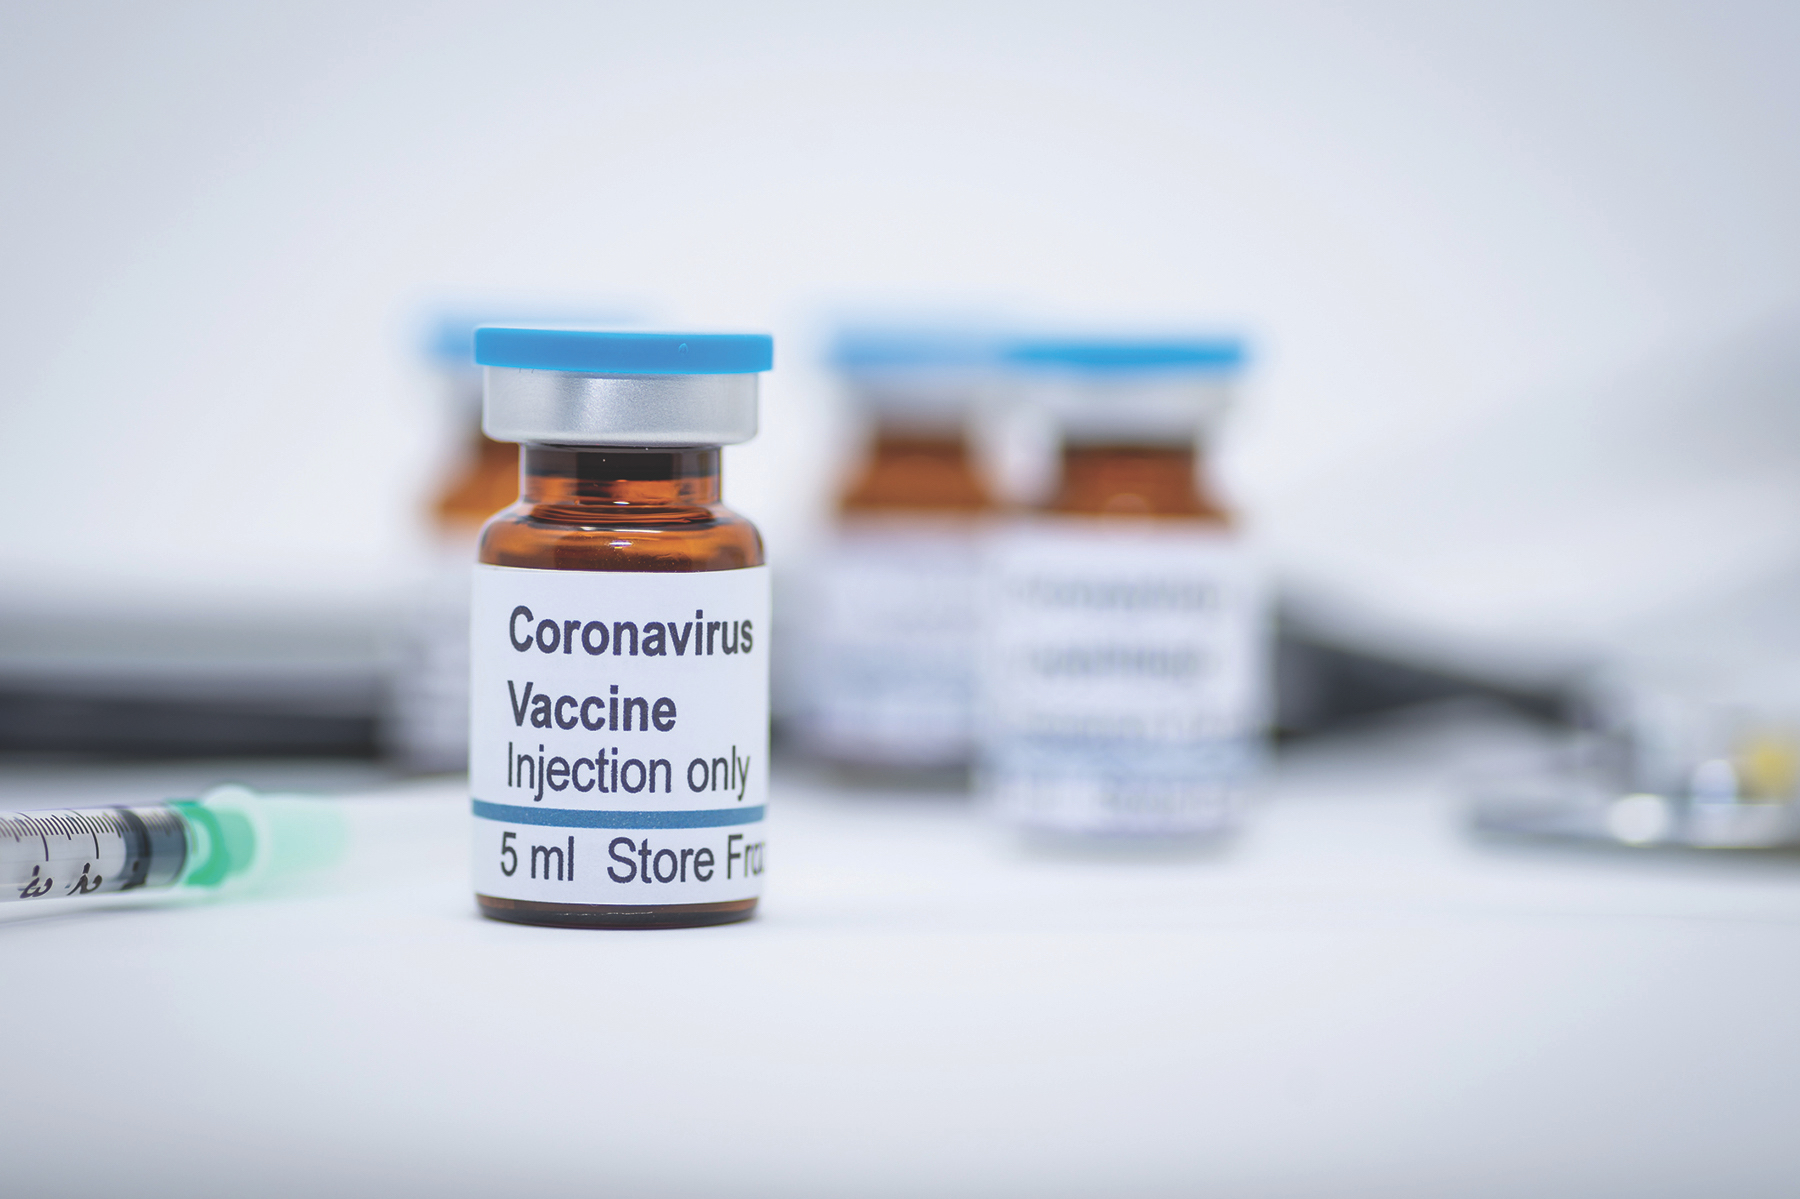 NEWS | REVEALED: People in Herefordshire could have to travel up to 30 miles to receive COVID-19 vaccine